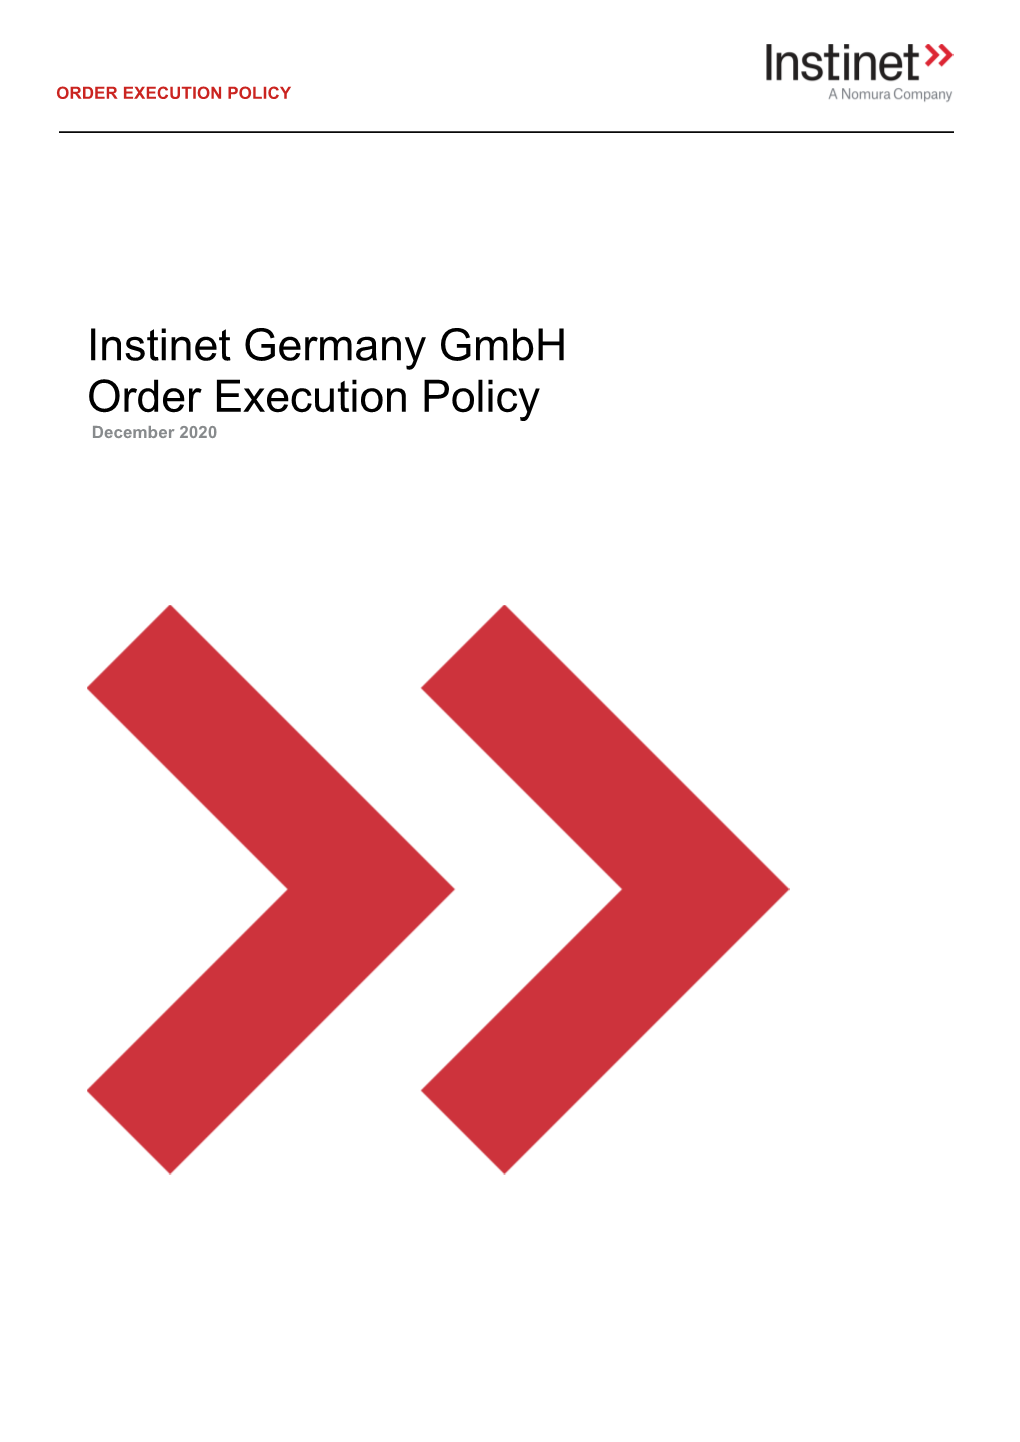 Order Execution Policy December 2020